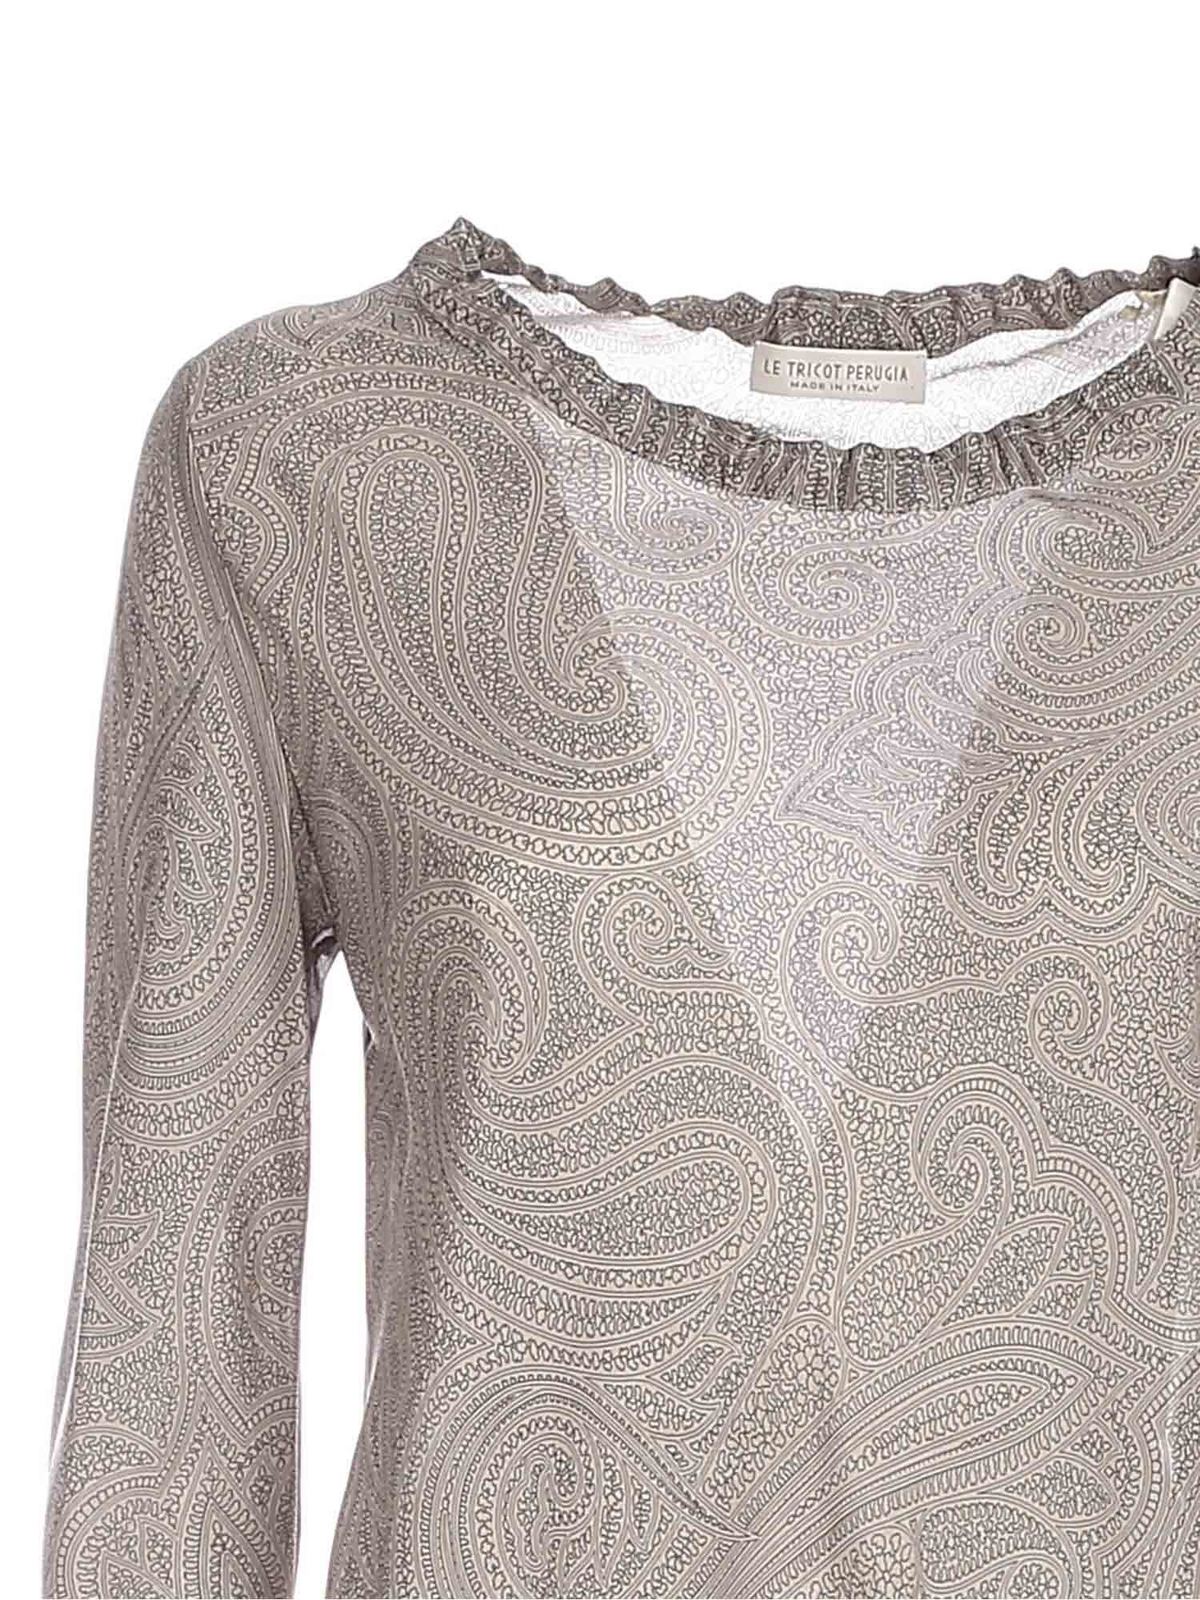 Blouses Le Tricot Perugia - Cashmere printed blouse in grey - 6615473277488